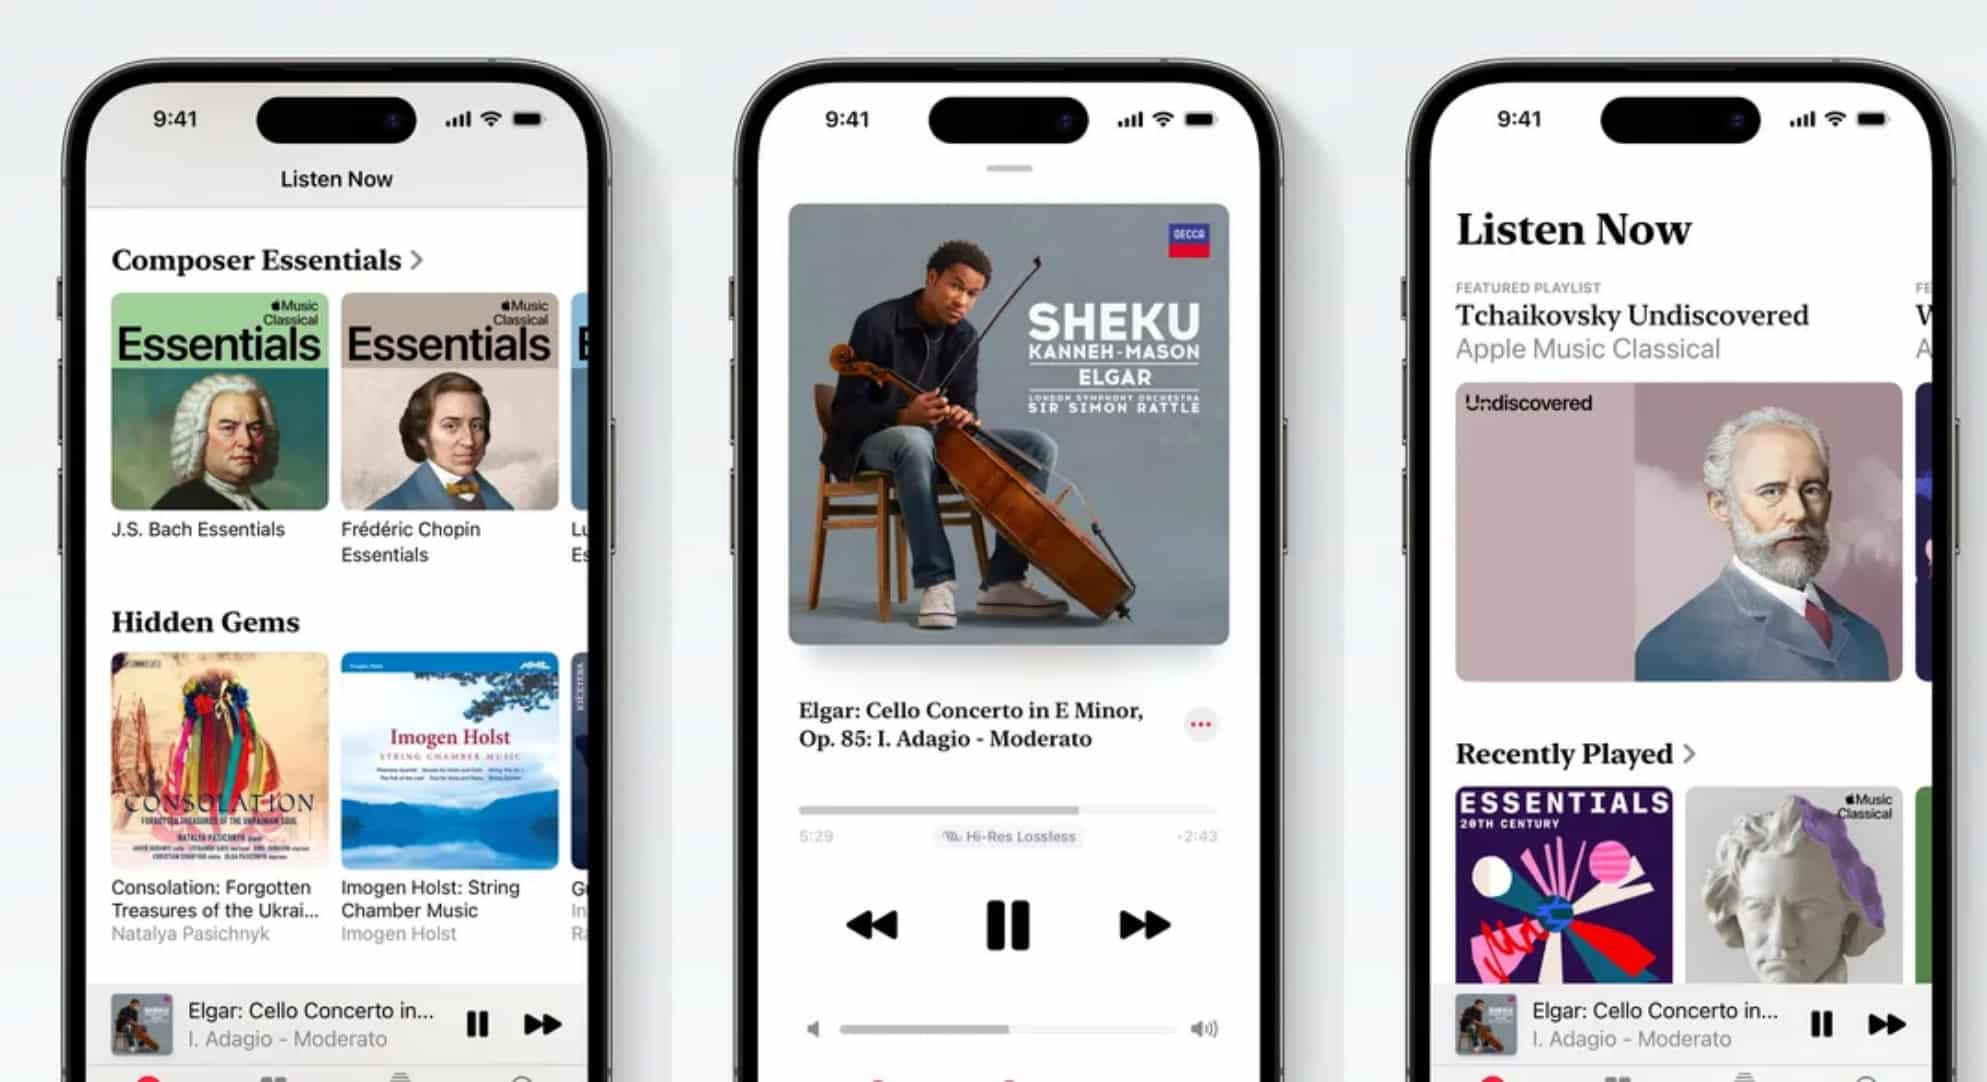 Features of Apple Music Classical